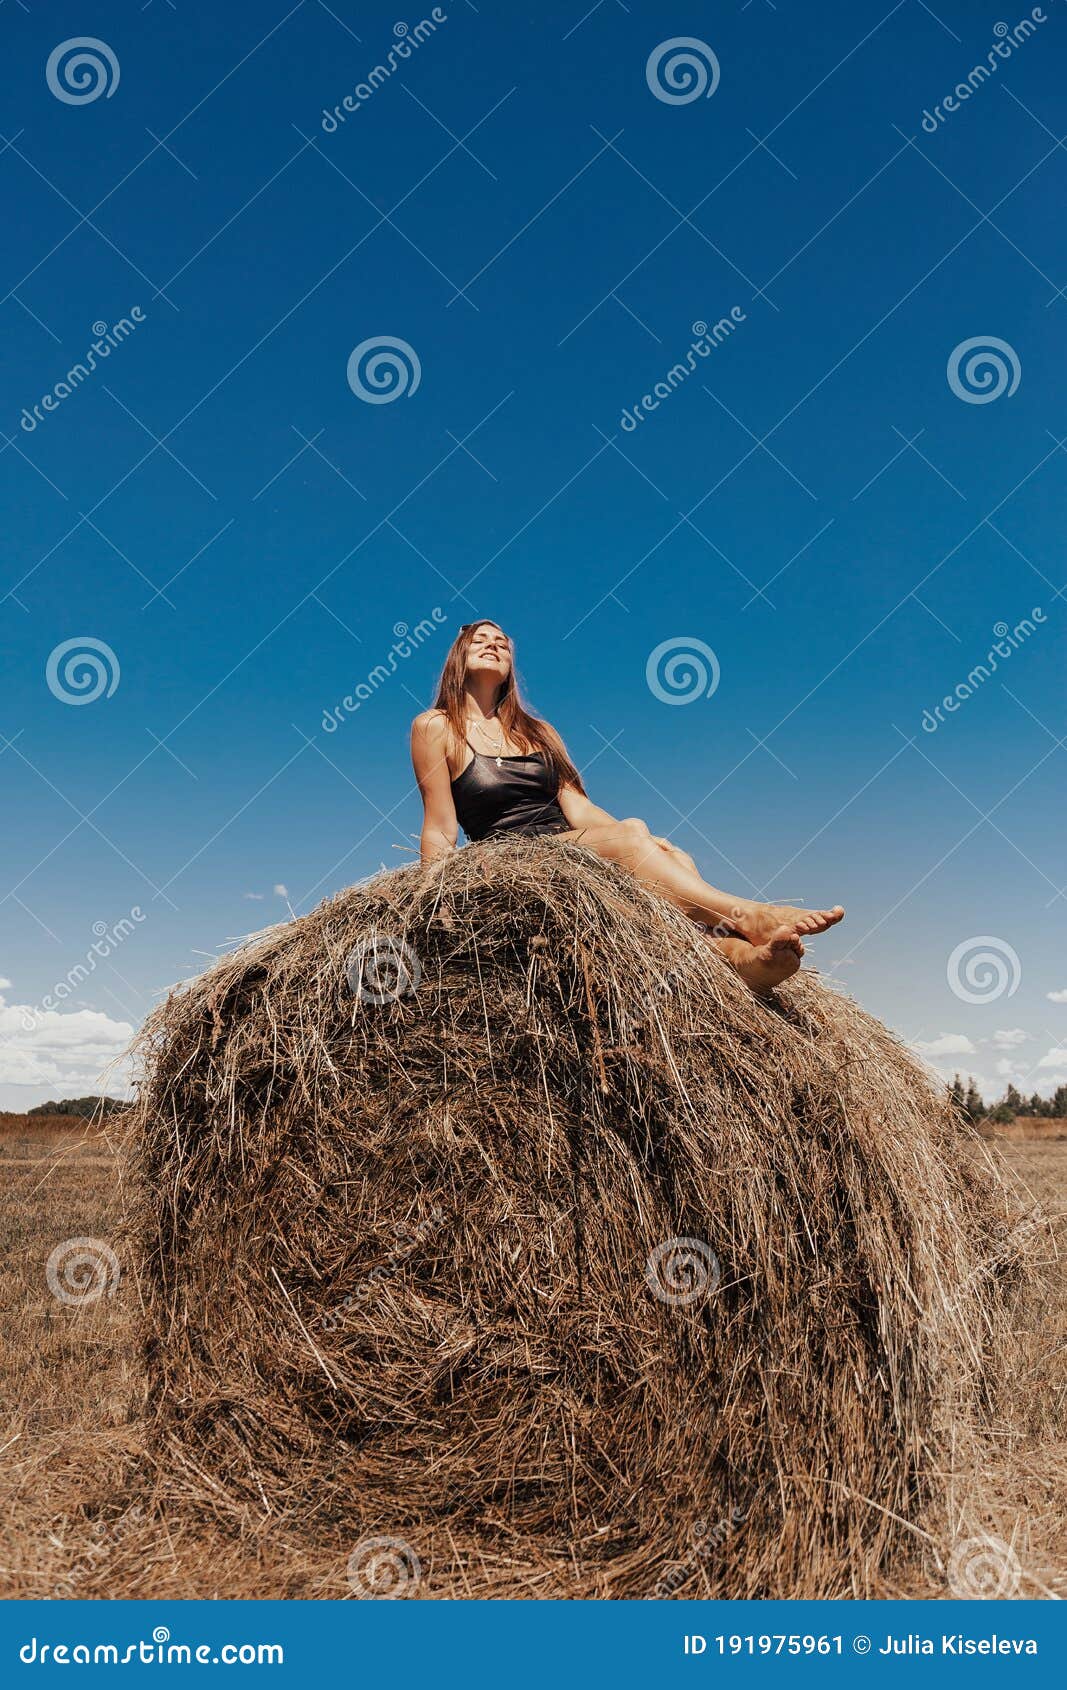 Beautiful Girl Is Resting After Work Girl On The Field With Hay Woman